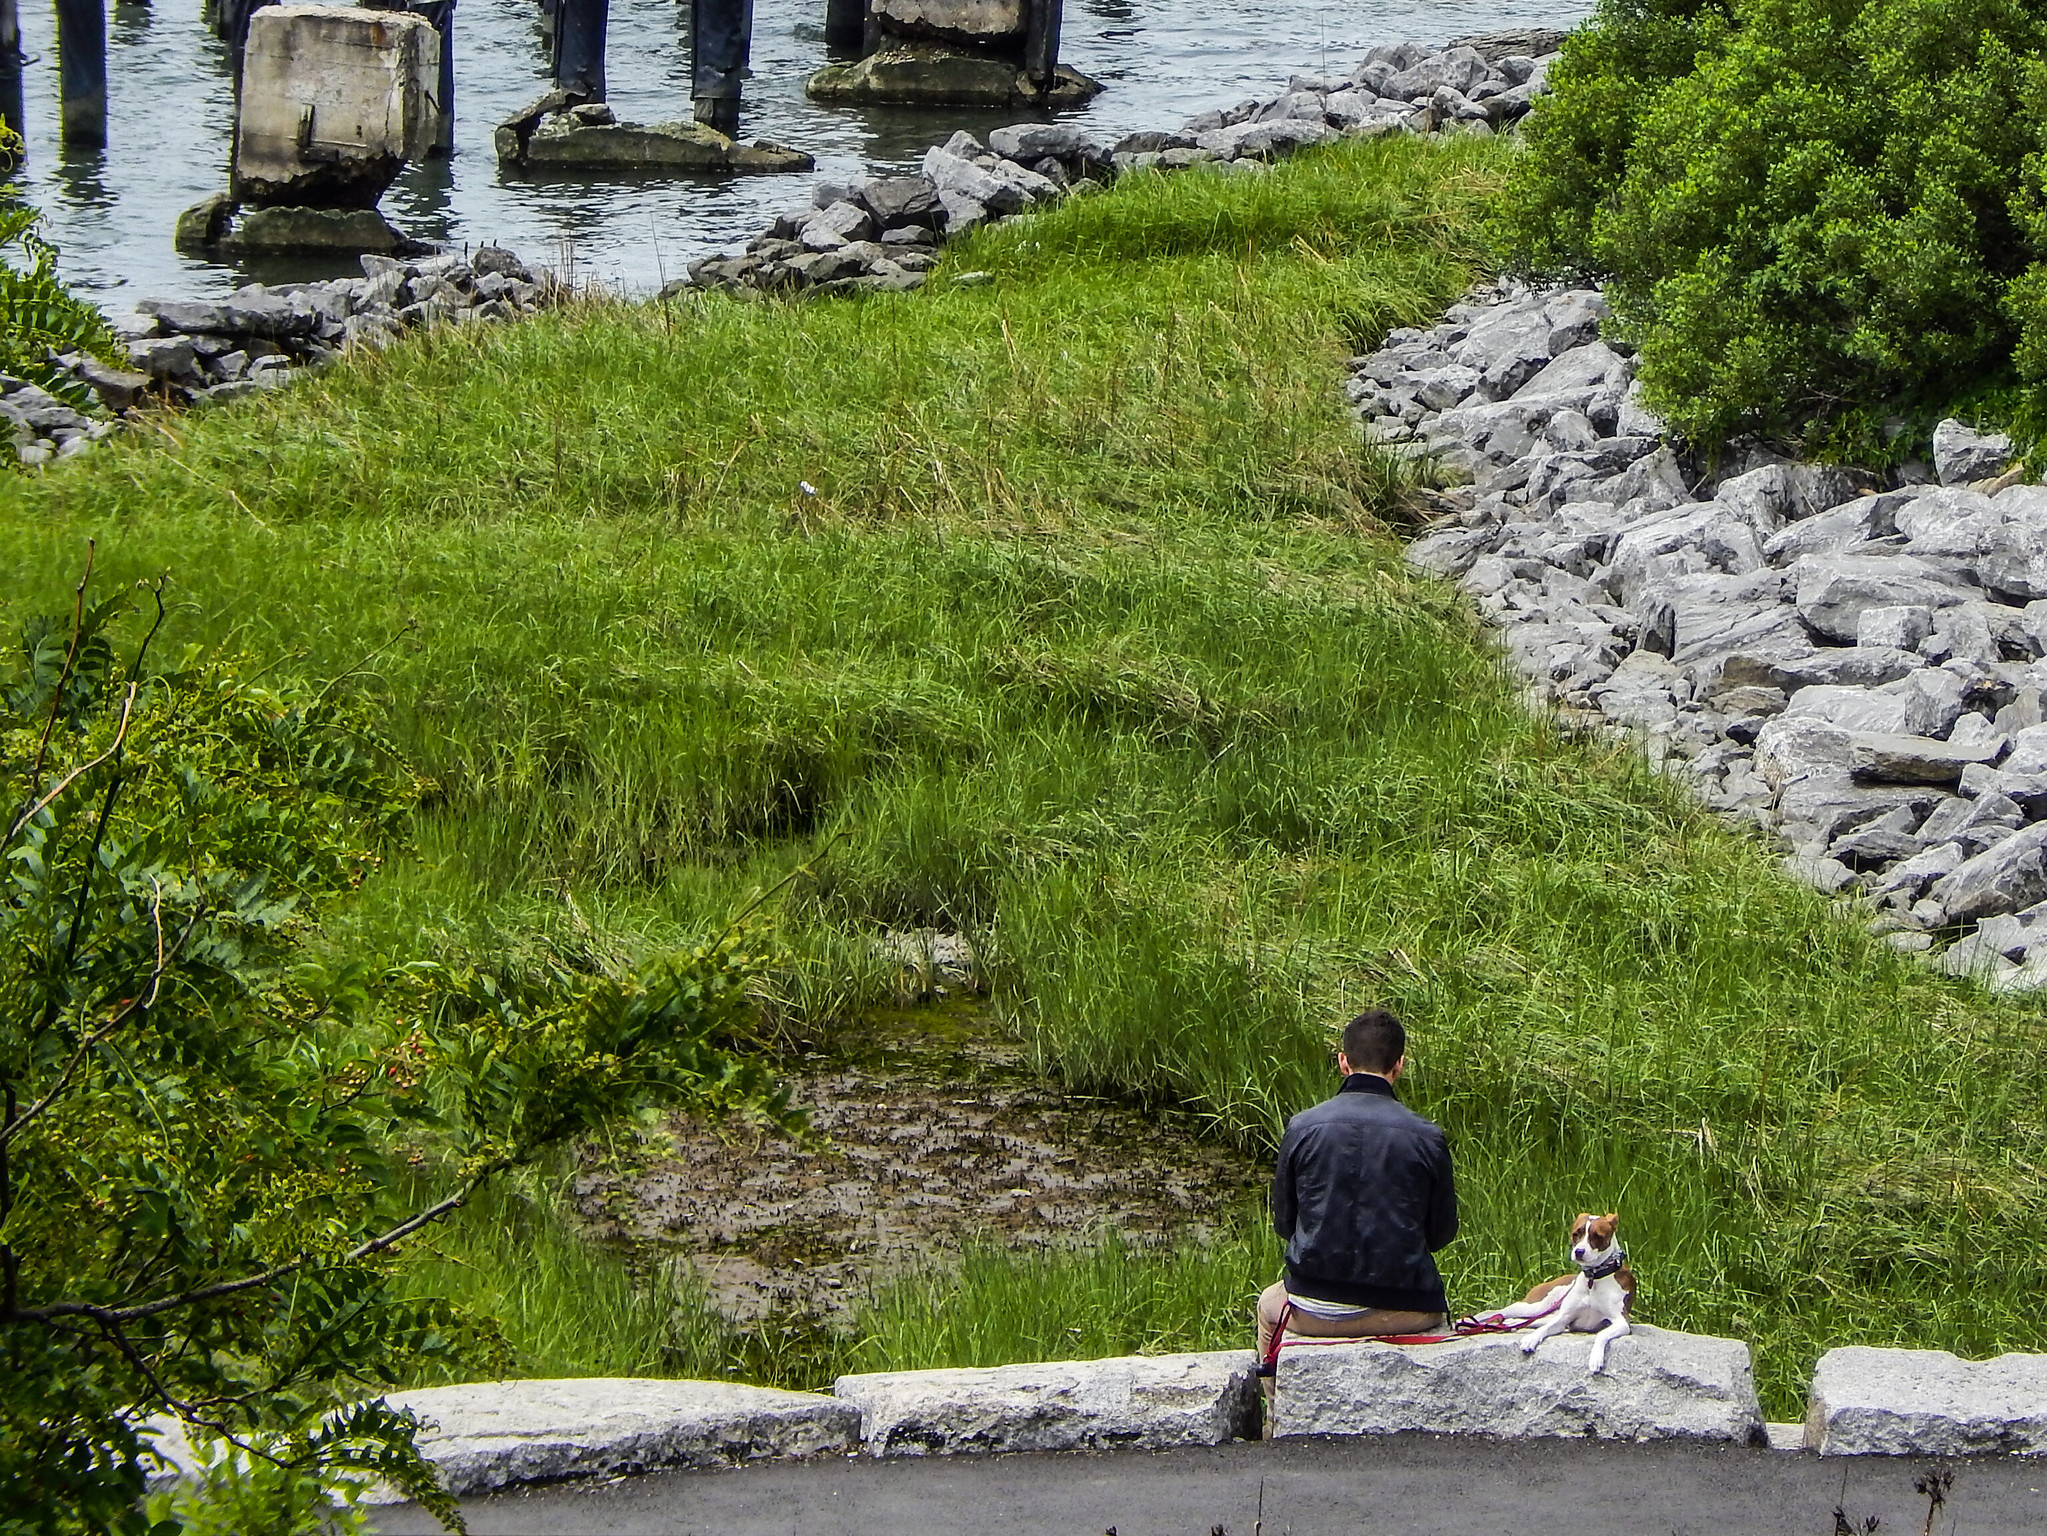 A photo of a man and a dog sitting near the Hudson River